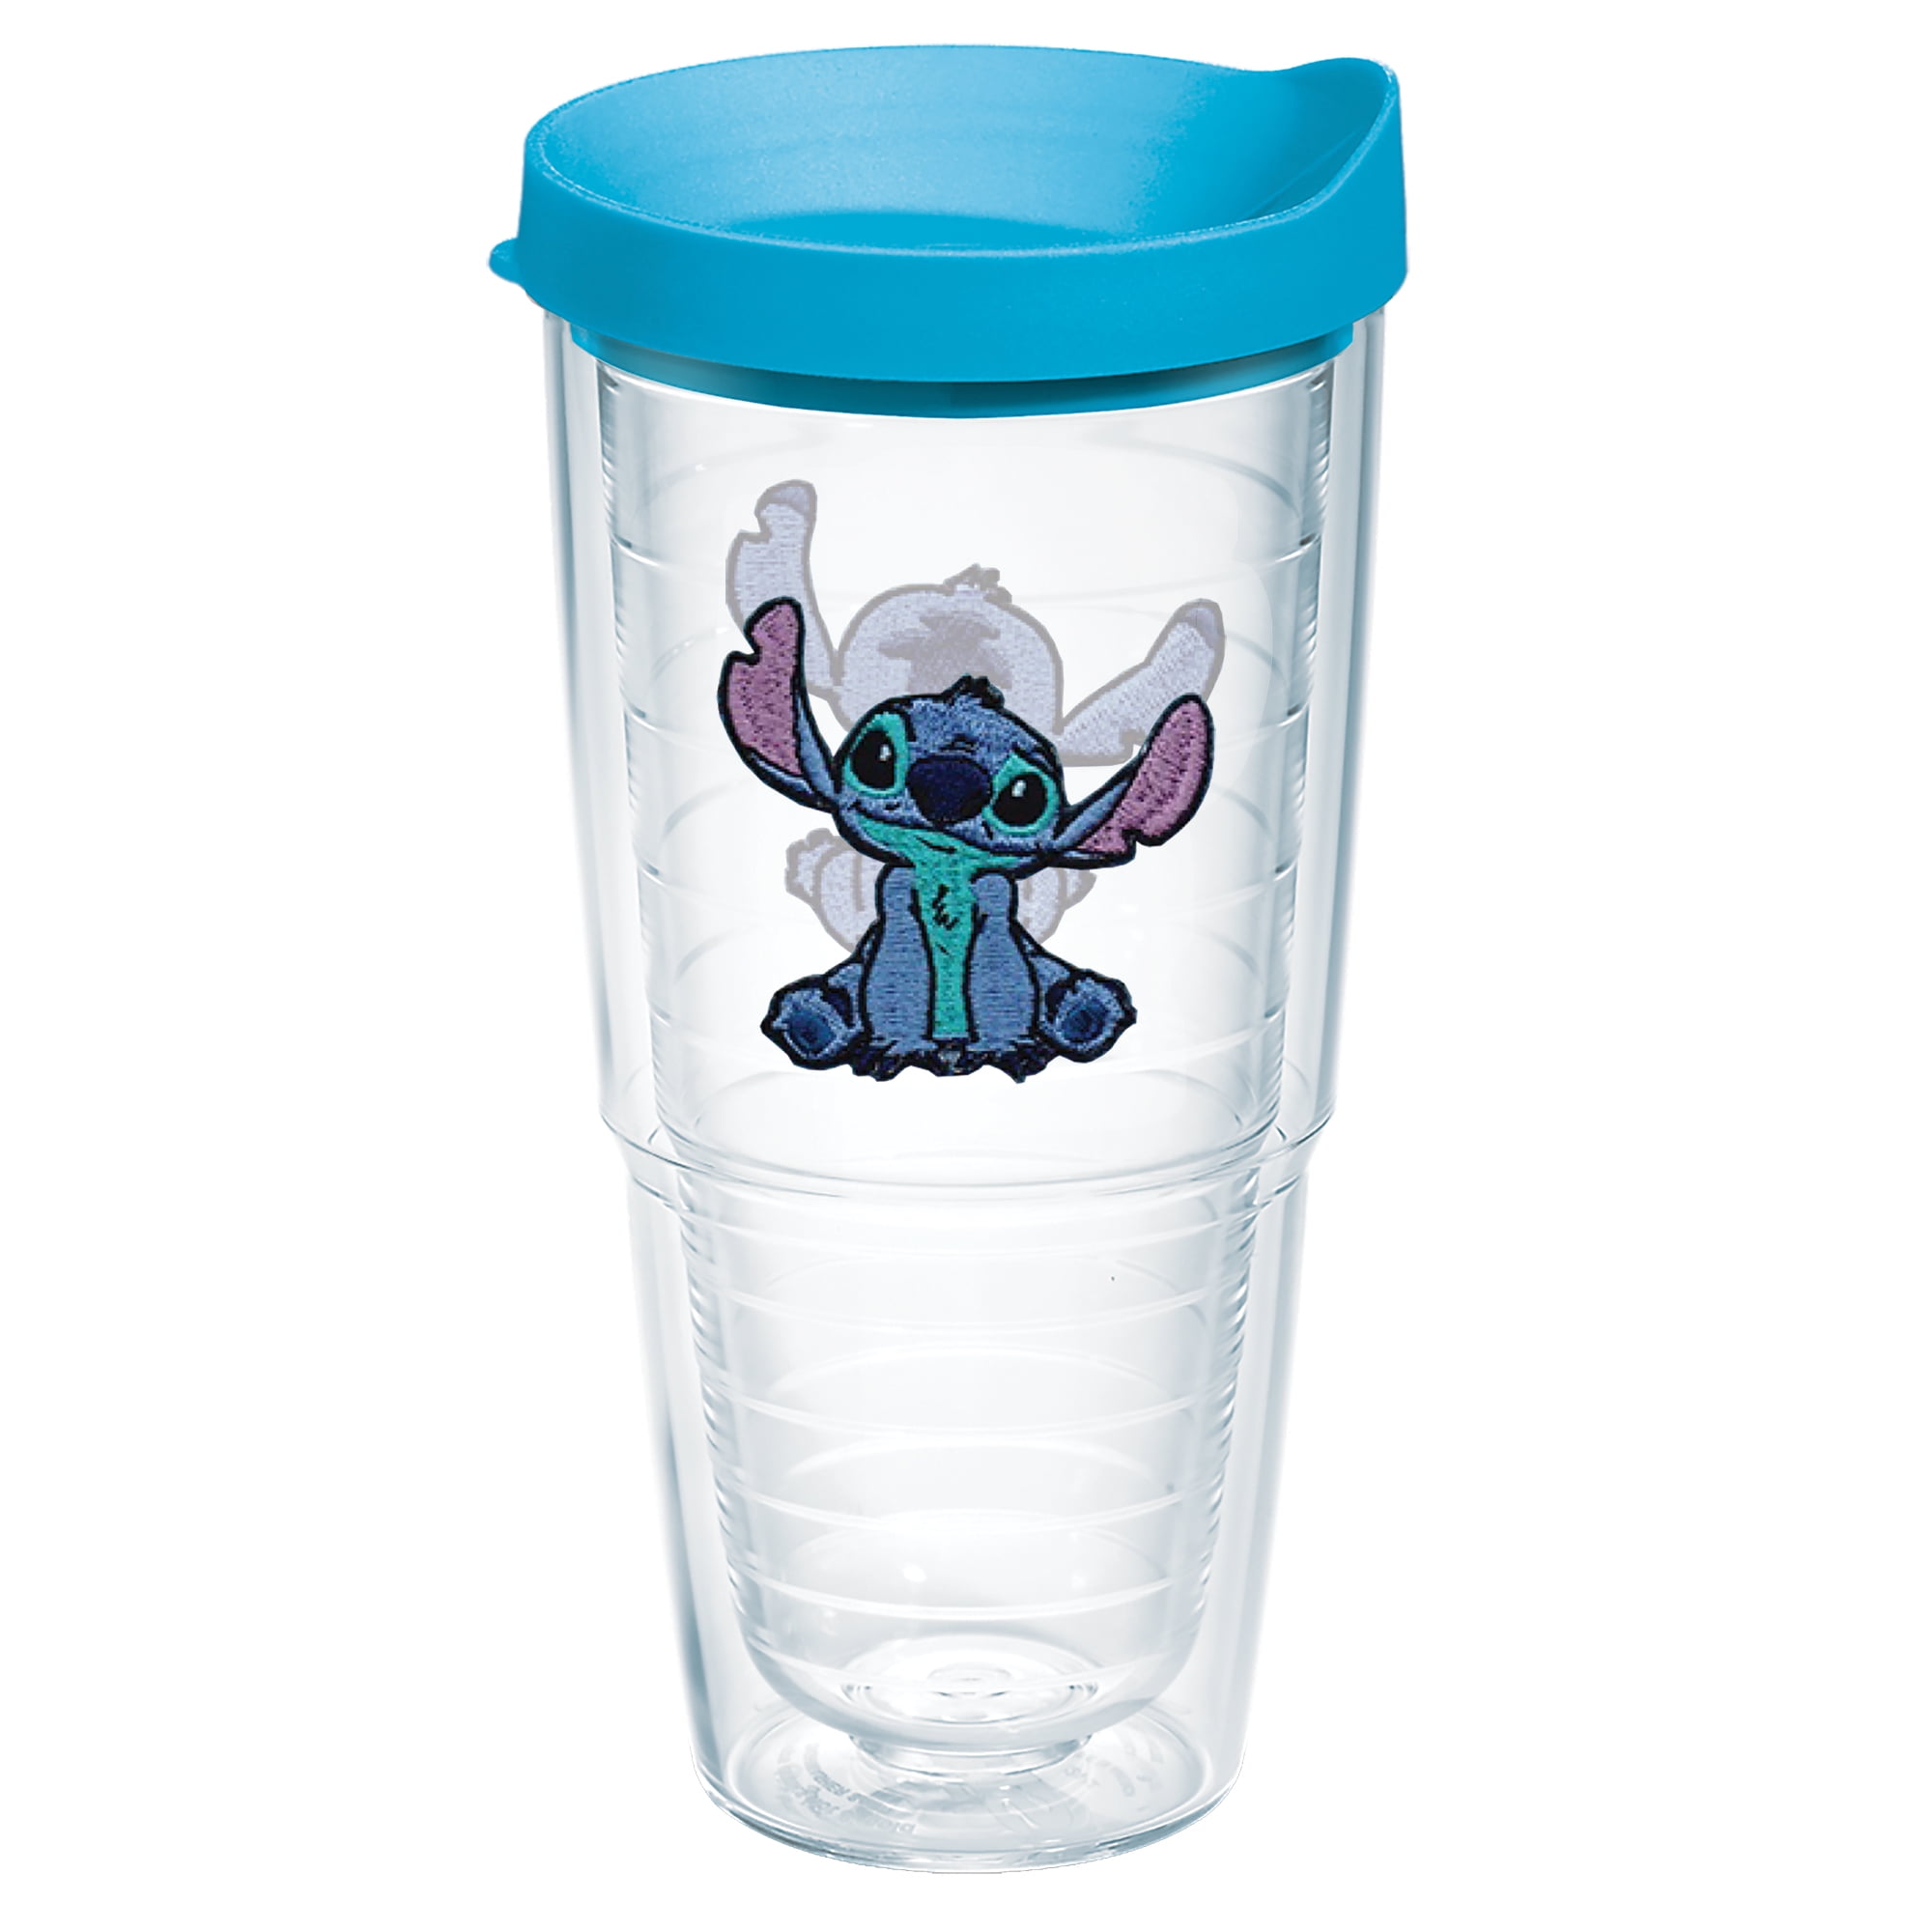 Tervis Black Lilo and Stitch 20oz. Nope Stainless Steel Tumbler